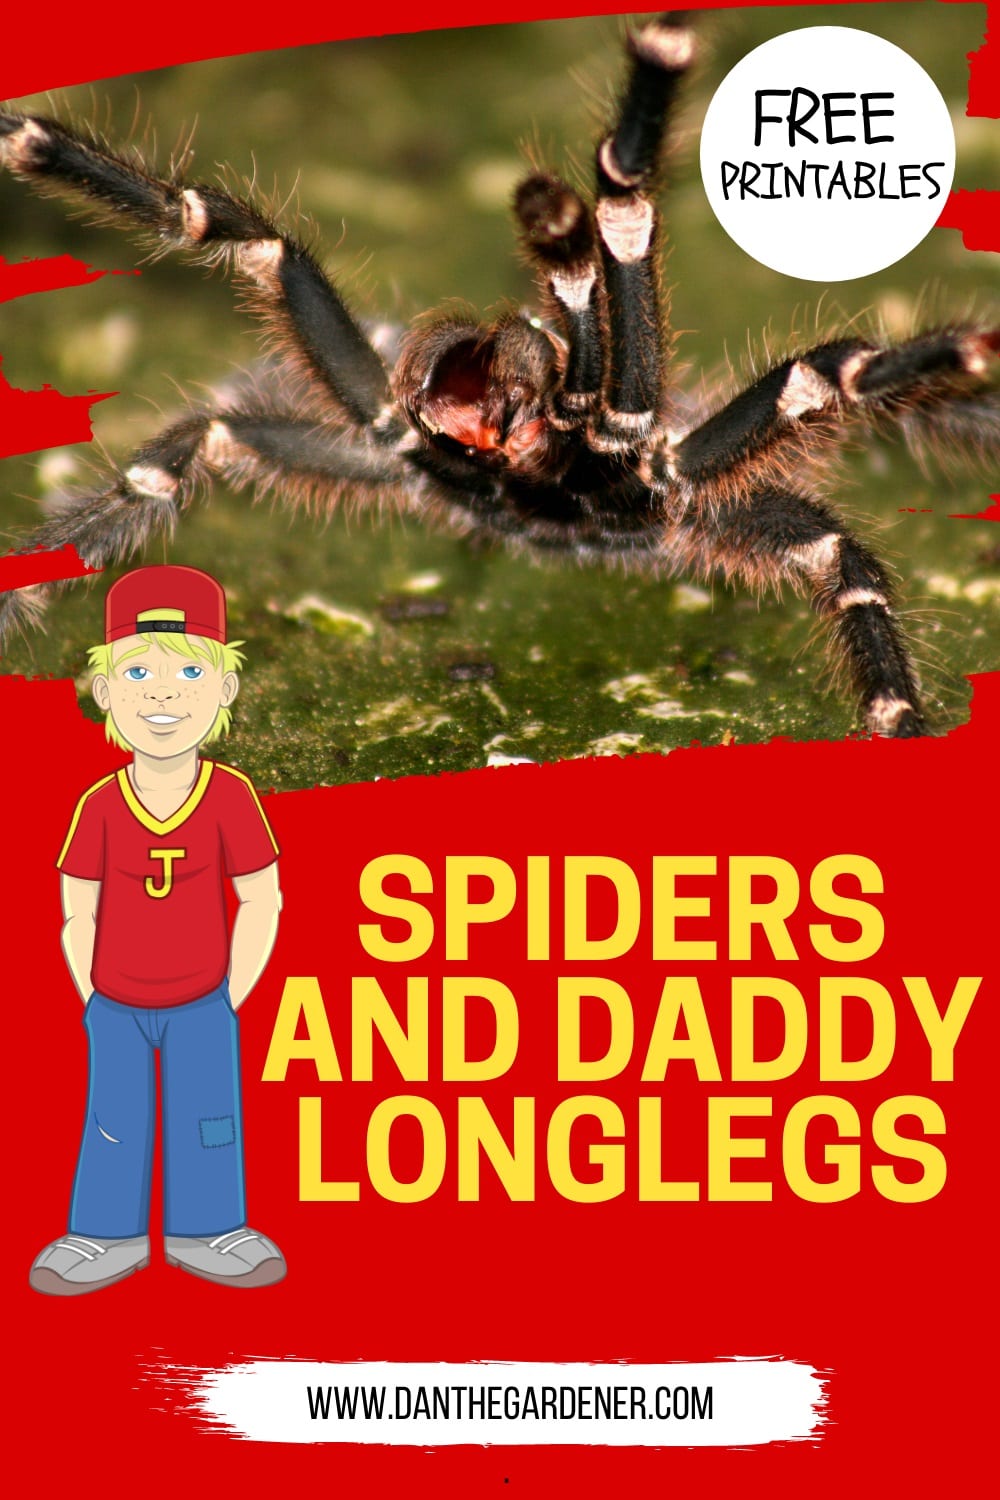 Spiders and Daddy Longlegs